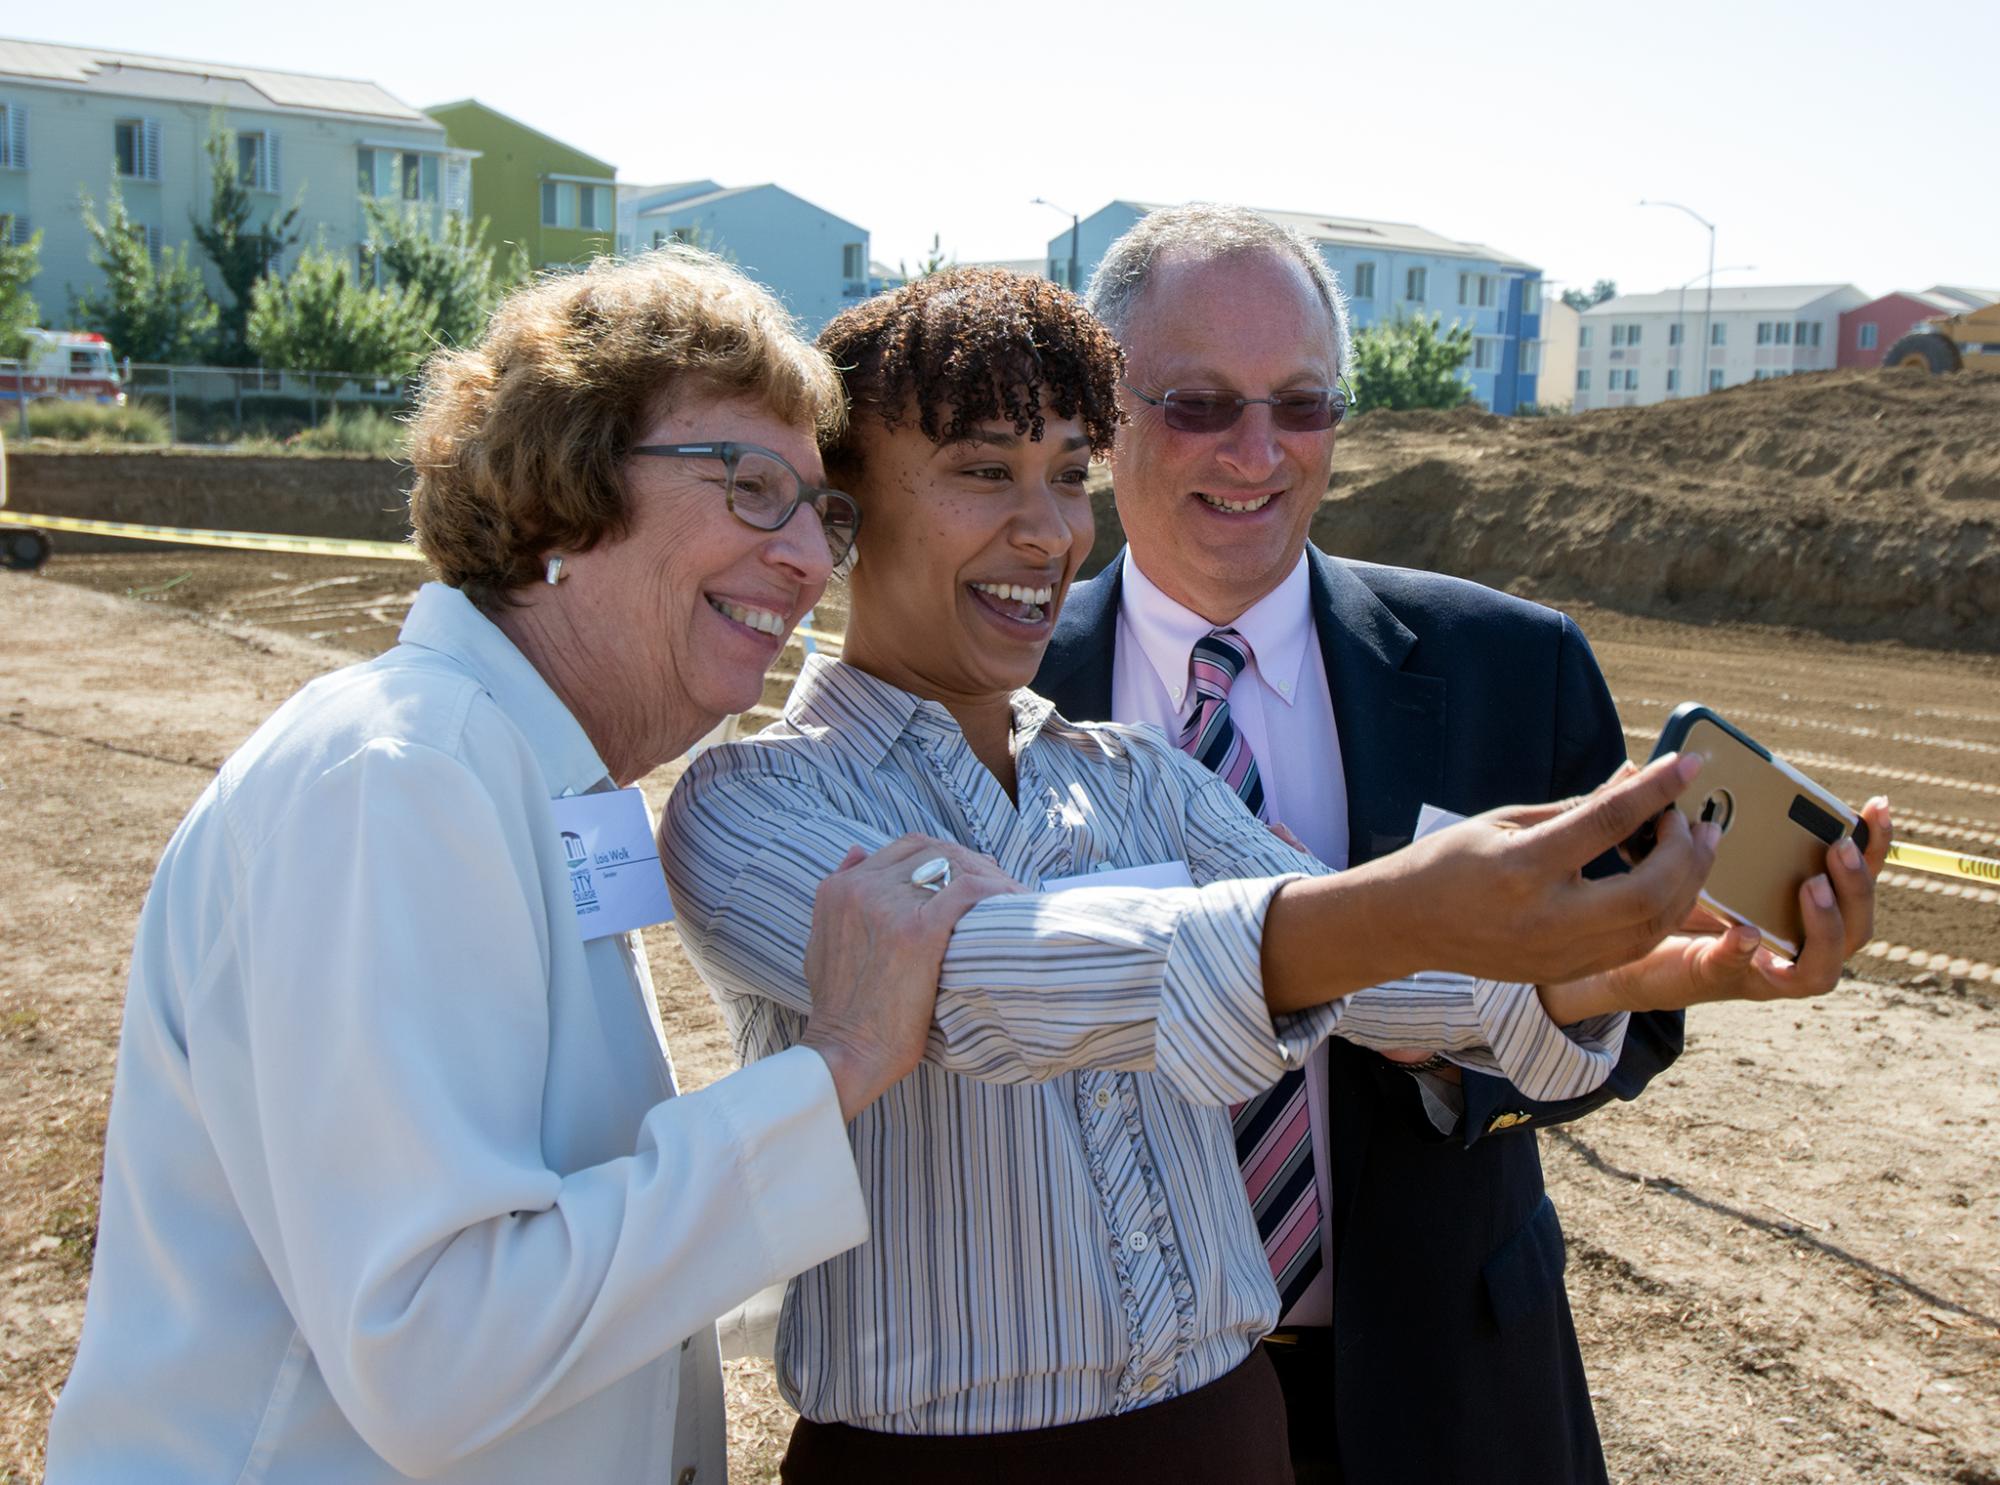 State Sen. Lois Wolk, Los Rios Community College Student Trustee Marianna Sousa and UC Davis Acting Chancellor Ralph J. Hexter pose for a photo.